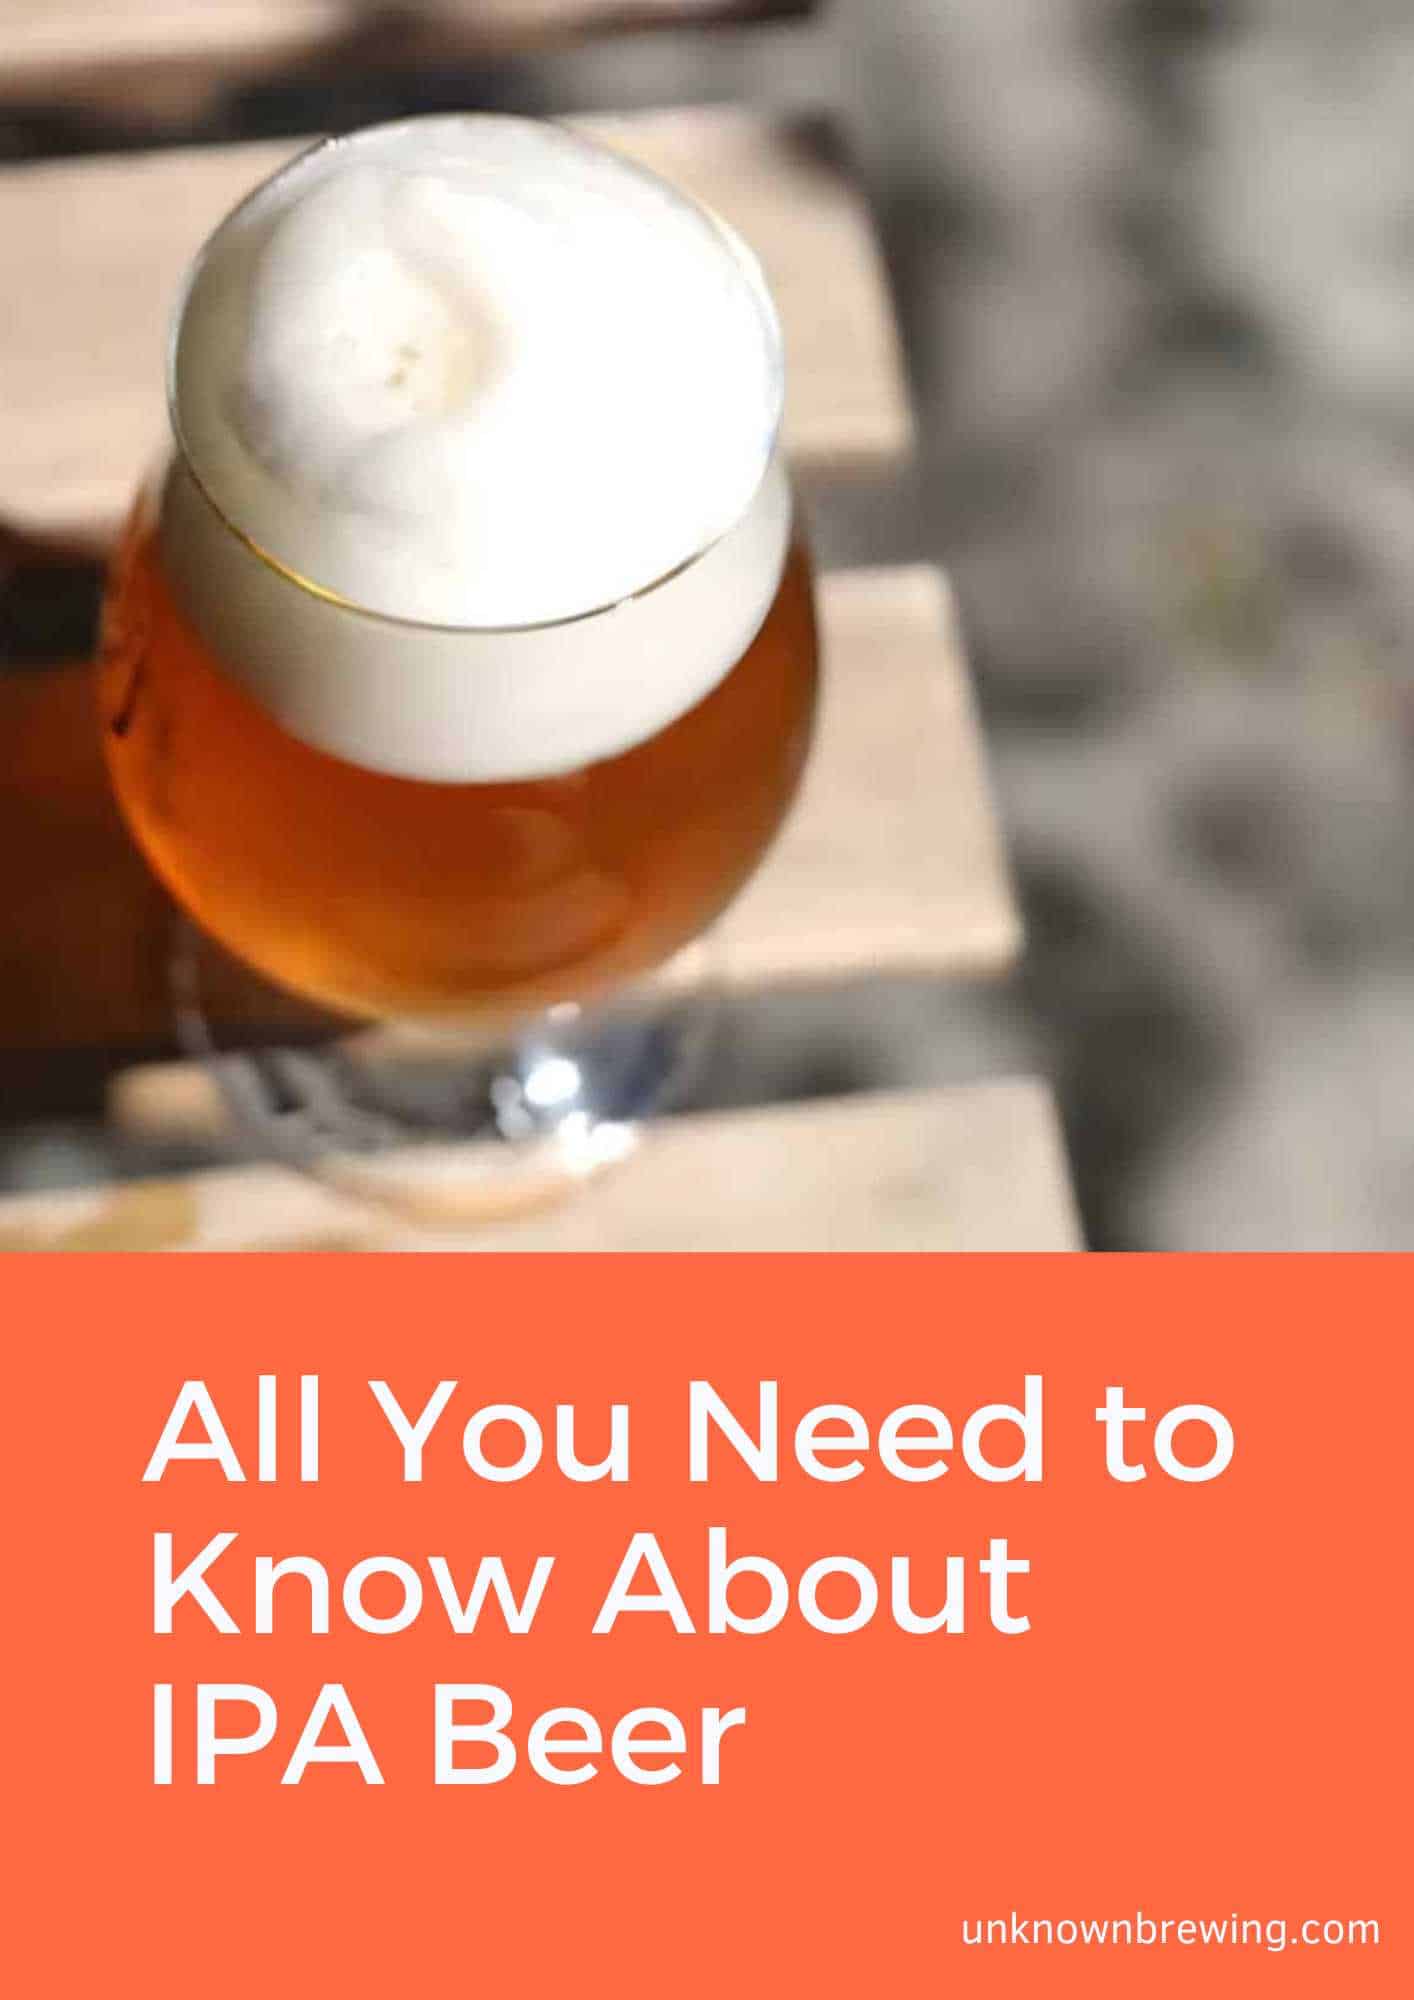 All You Need to Know About IPA Beer